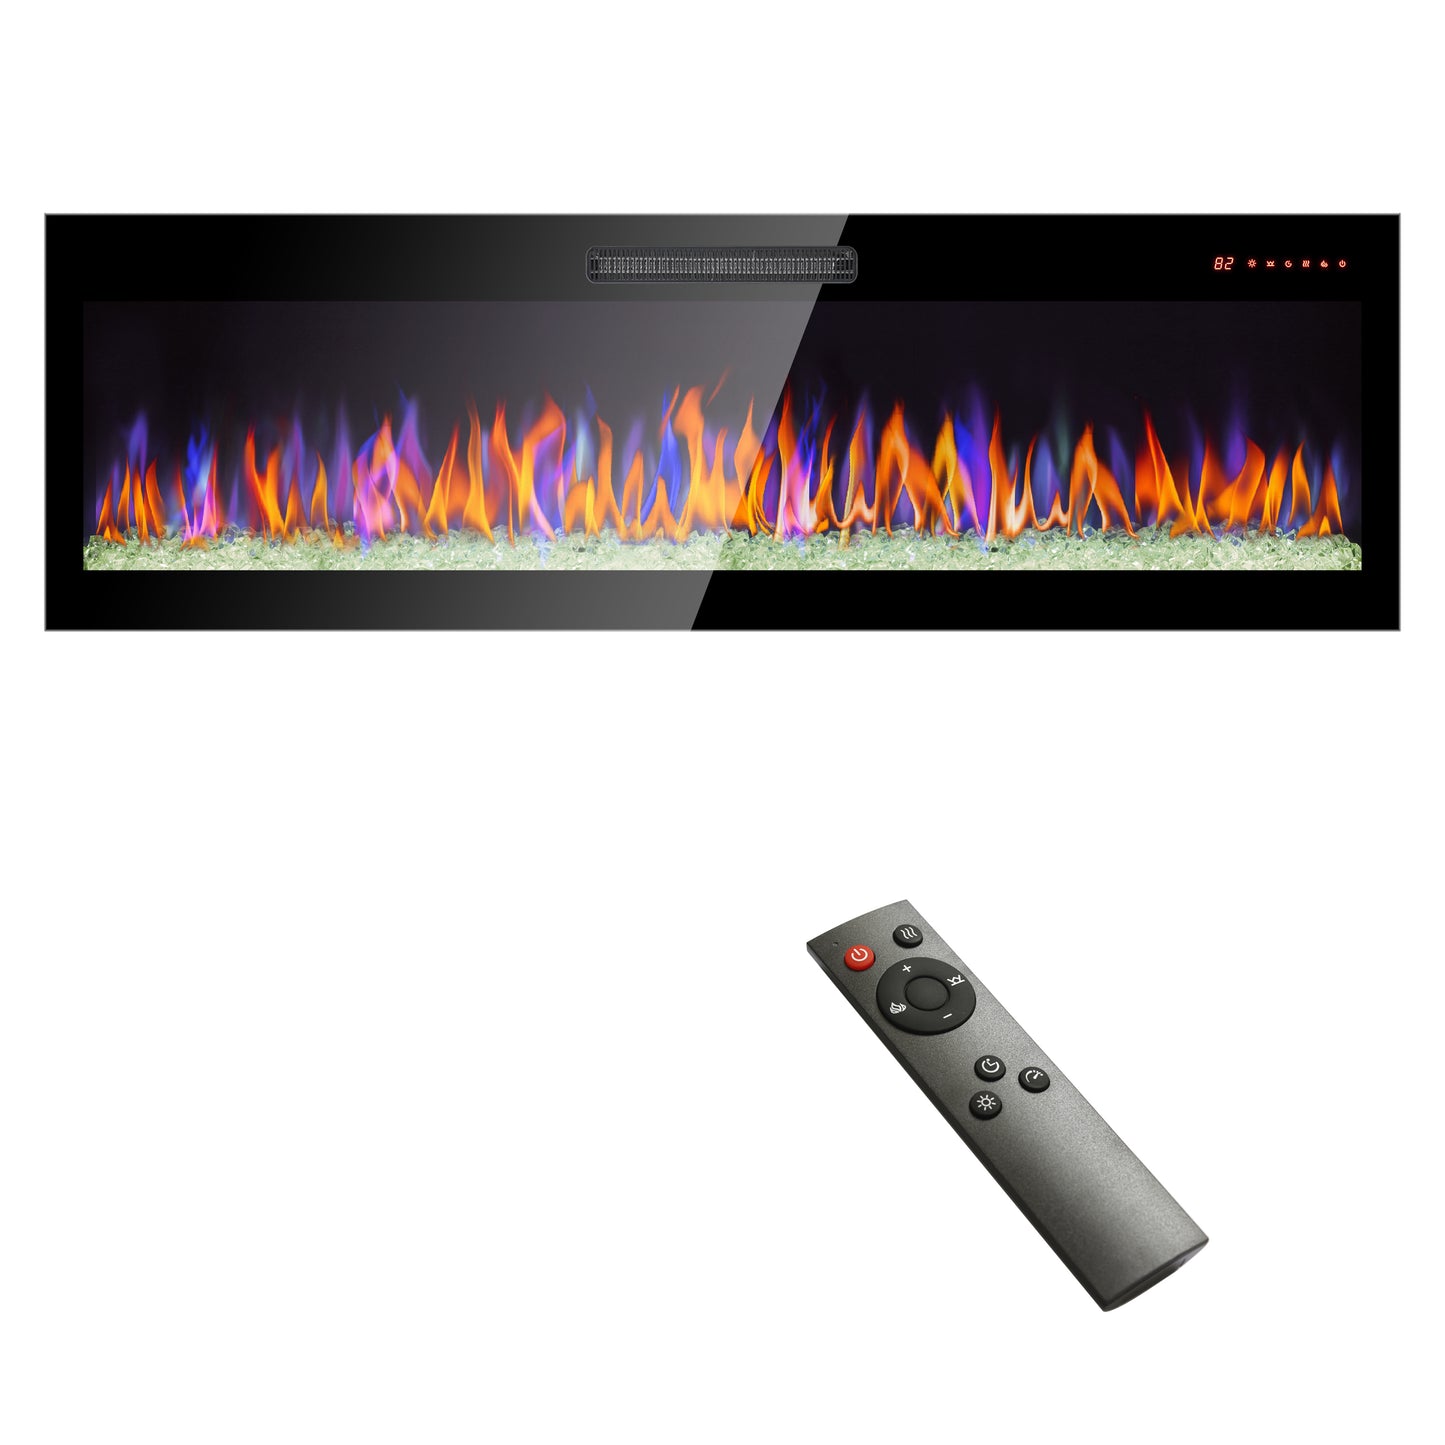 60-Inch Wall Mounted Electric Fireplace with Multi-Color Flame & Emberbed